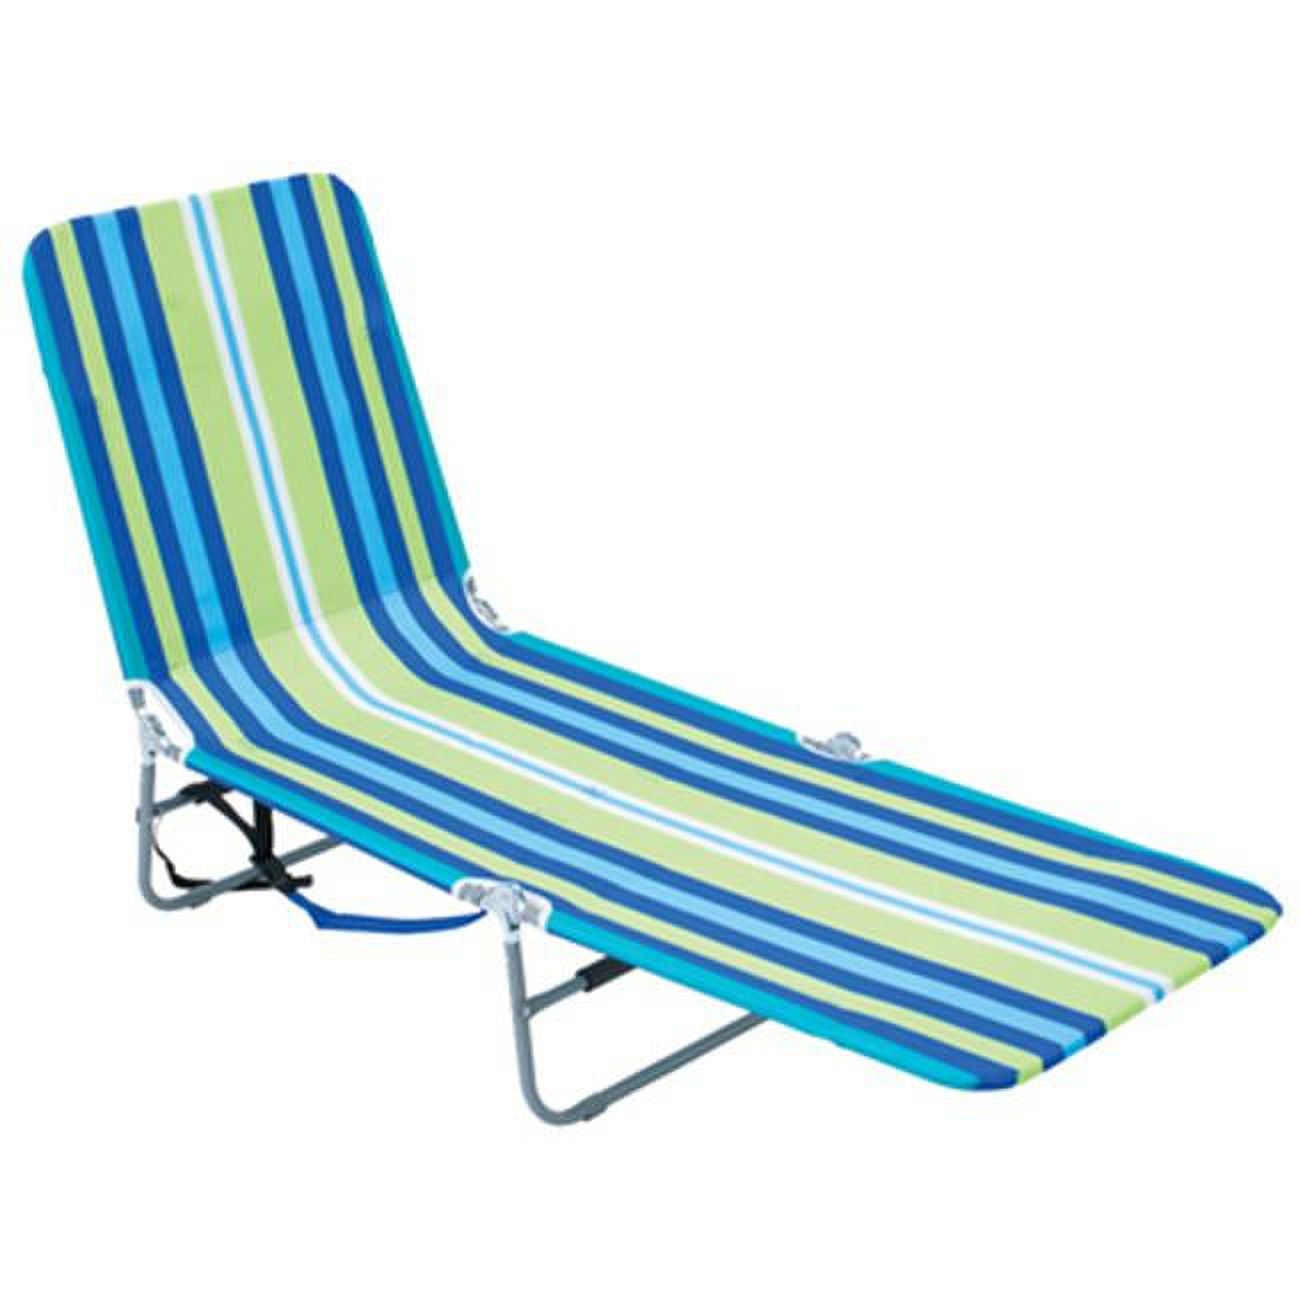 BPL-1616 Backpack Chaise Lounger - image 1 of 2